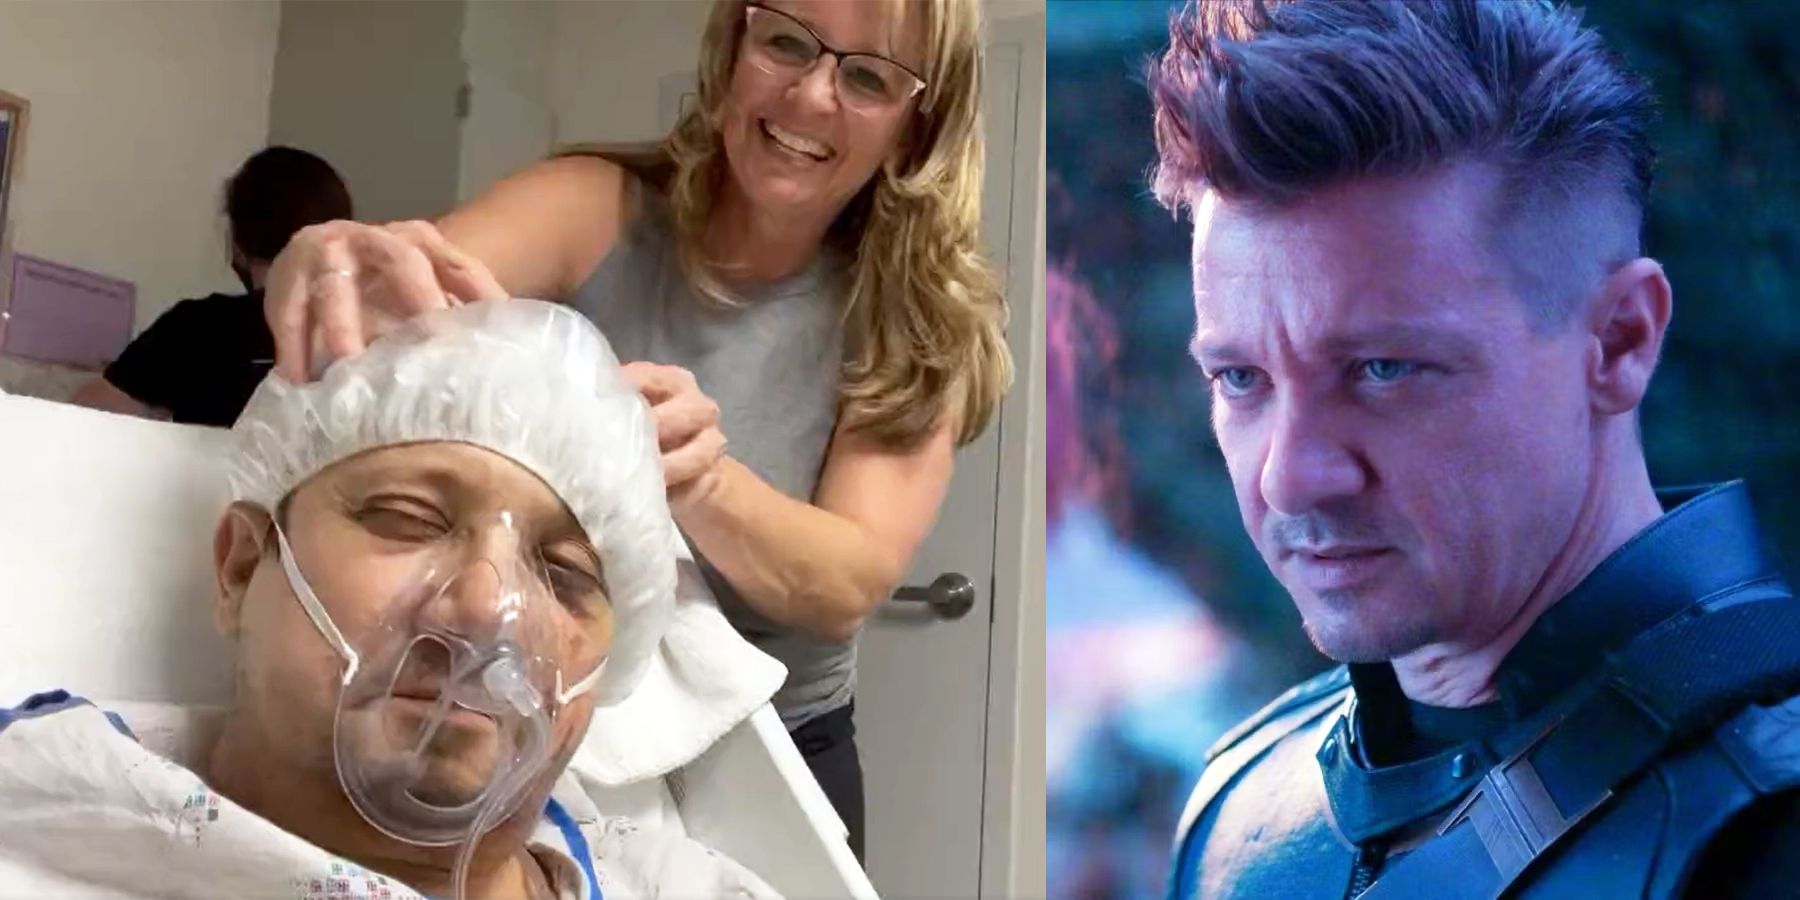 Jeremy Renner will soon start his recovery process